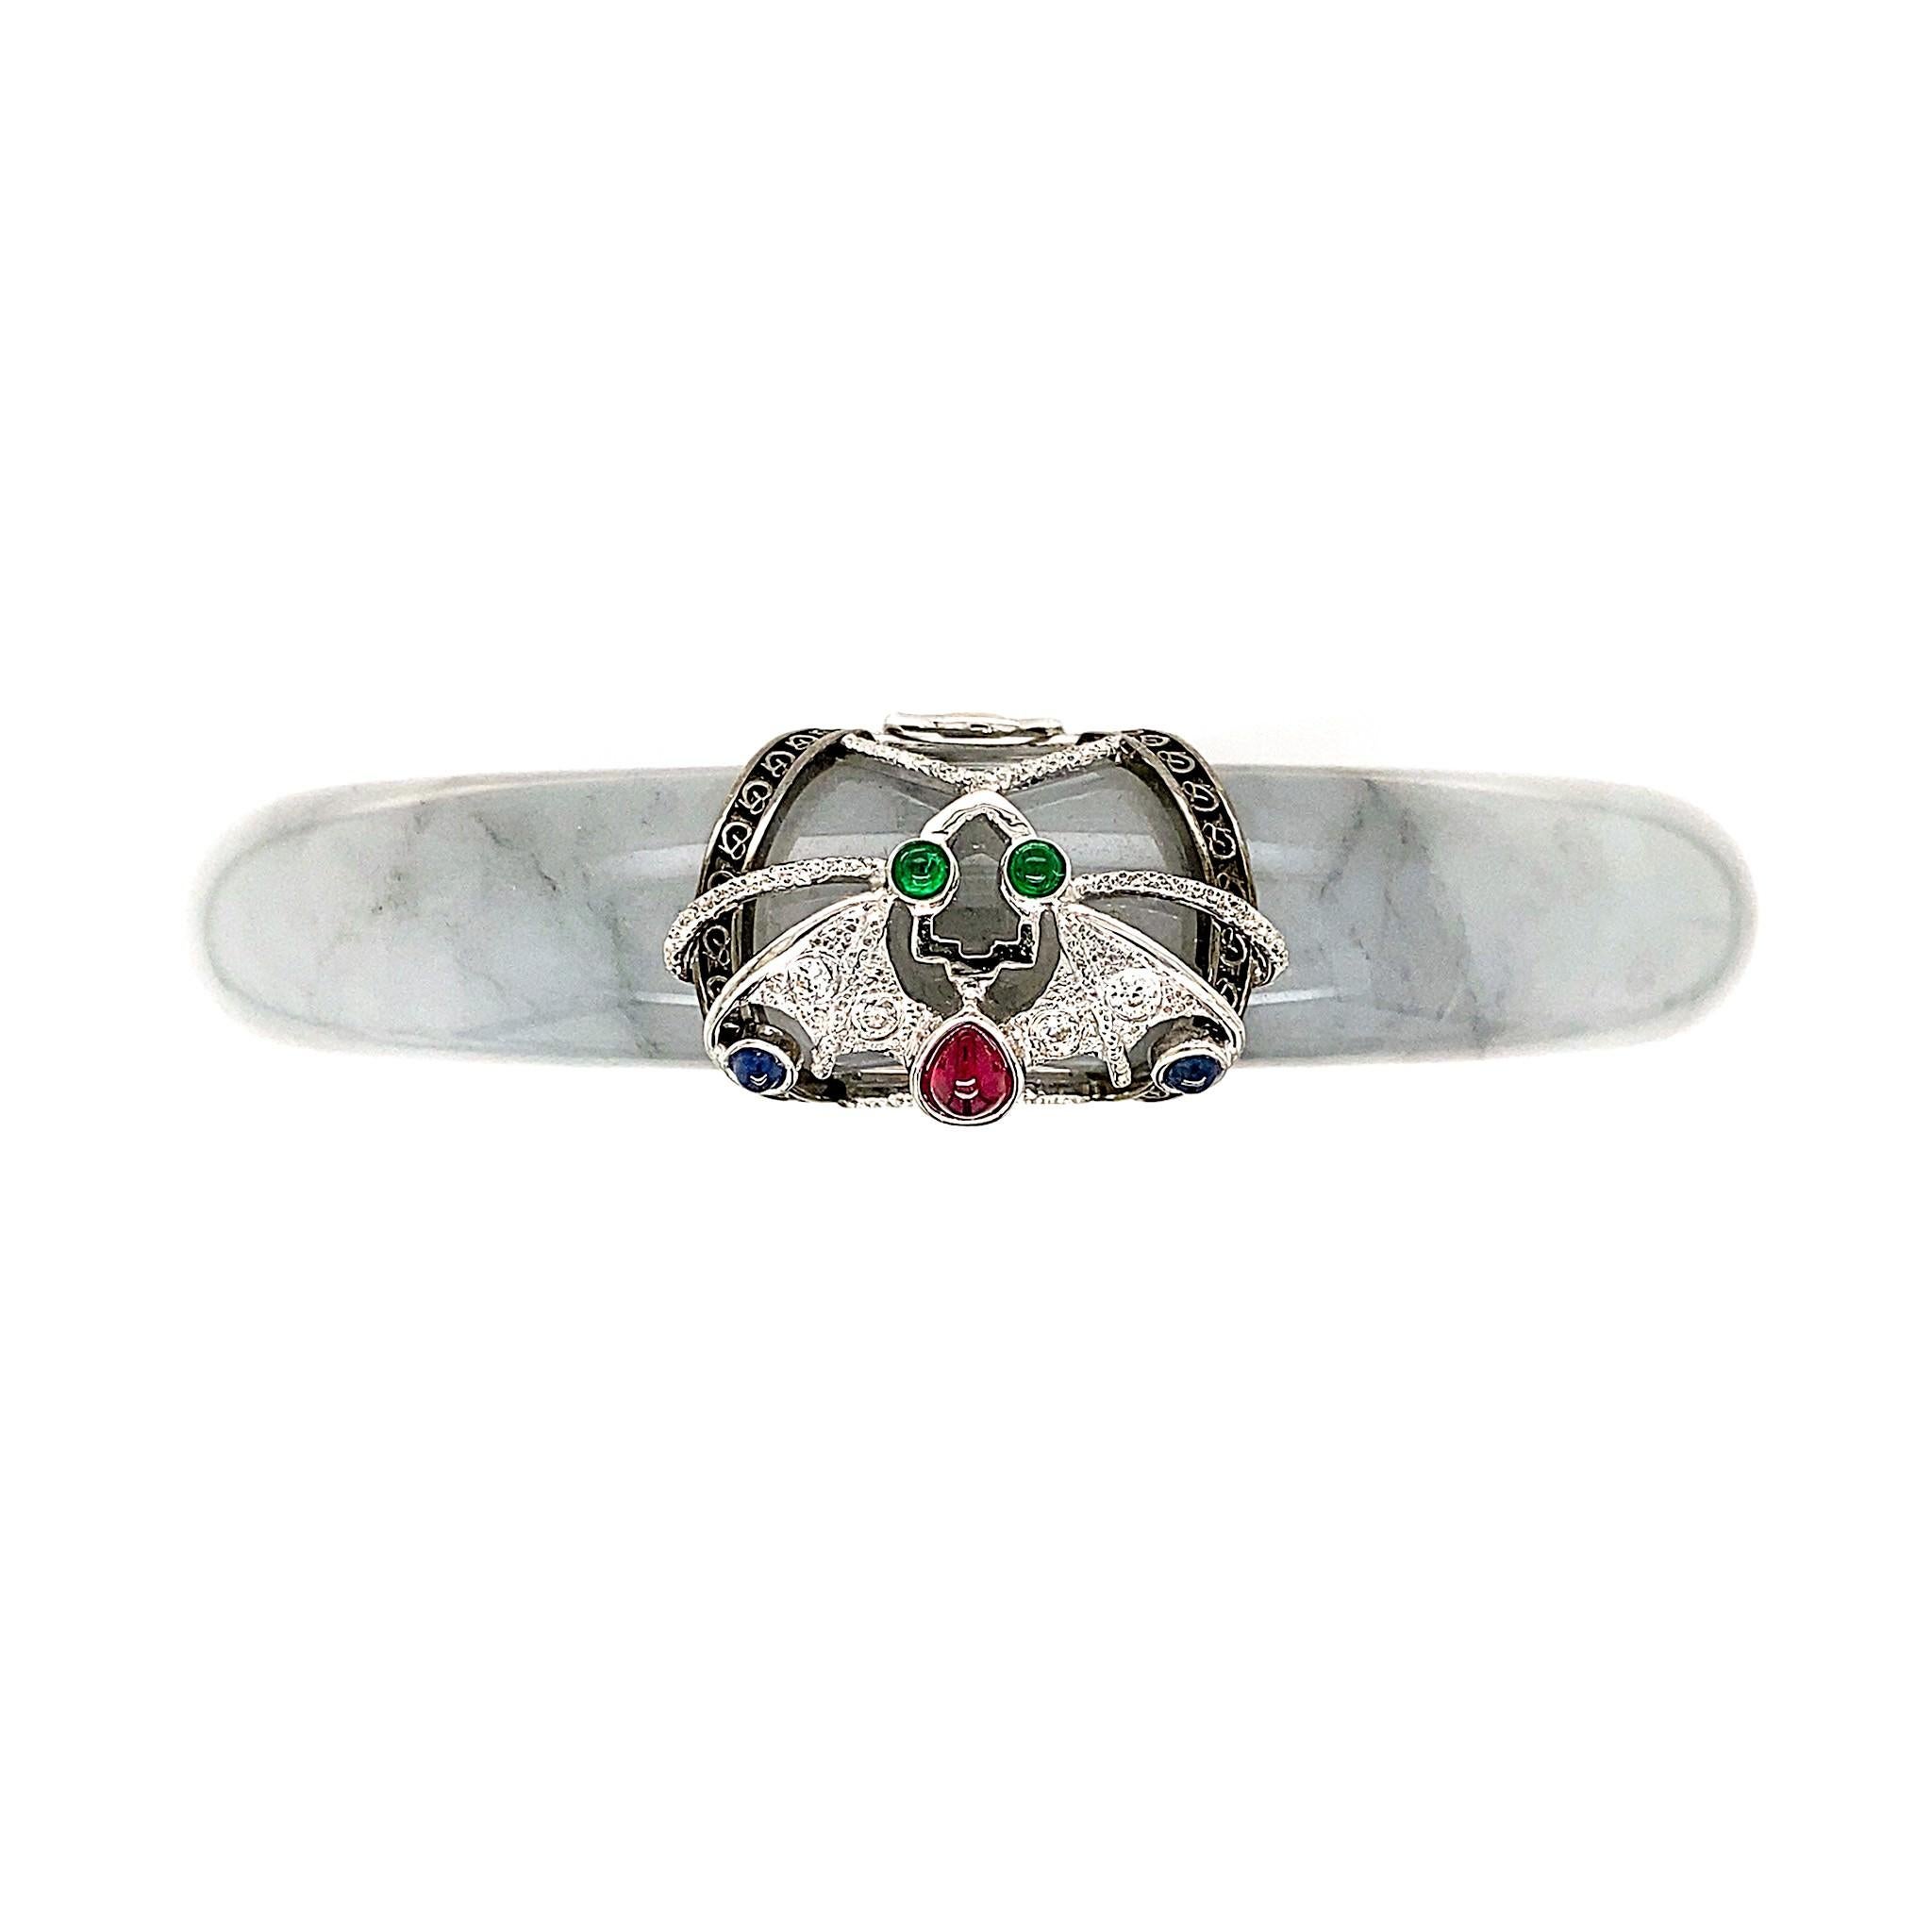 The House of Dilys’ presents – the Jade 'Nocturna' Bangle. This HKJSL certified 232.06cts natural jade with black and grey smoke-like inclusions is adorned with an 18K gold guard that takes on the Feng Shui symbol for prosperity and abundance – the